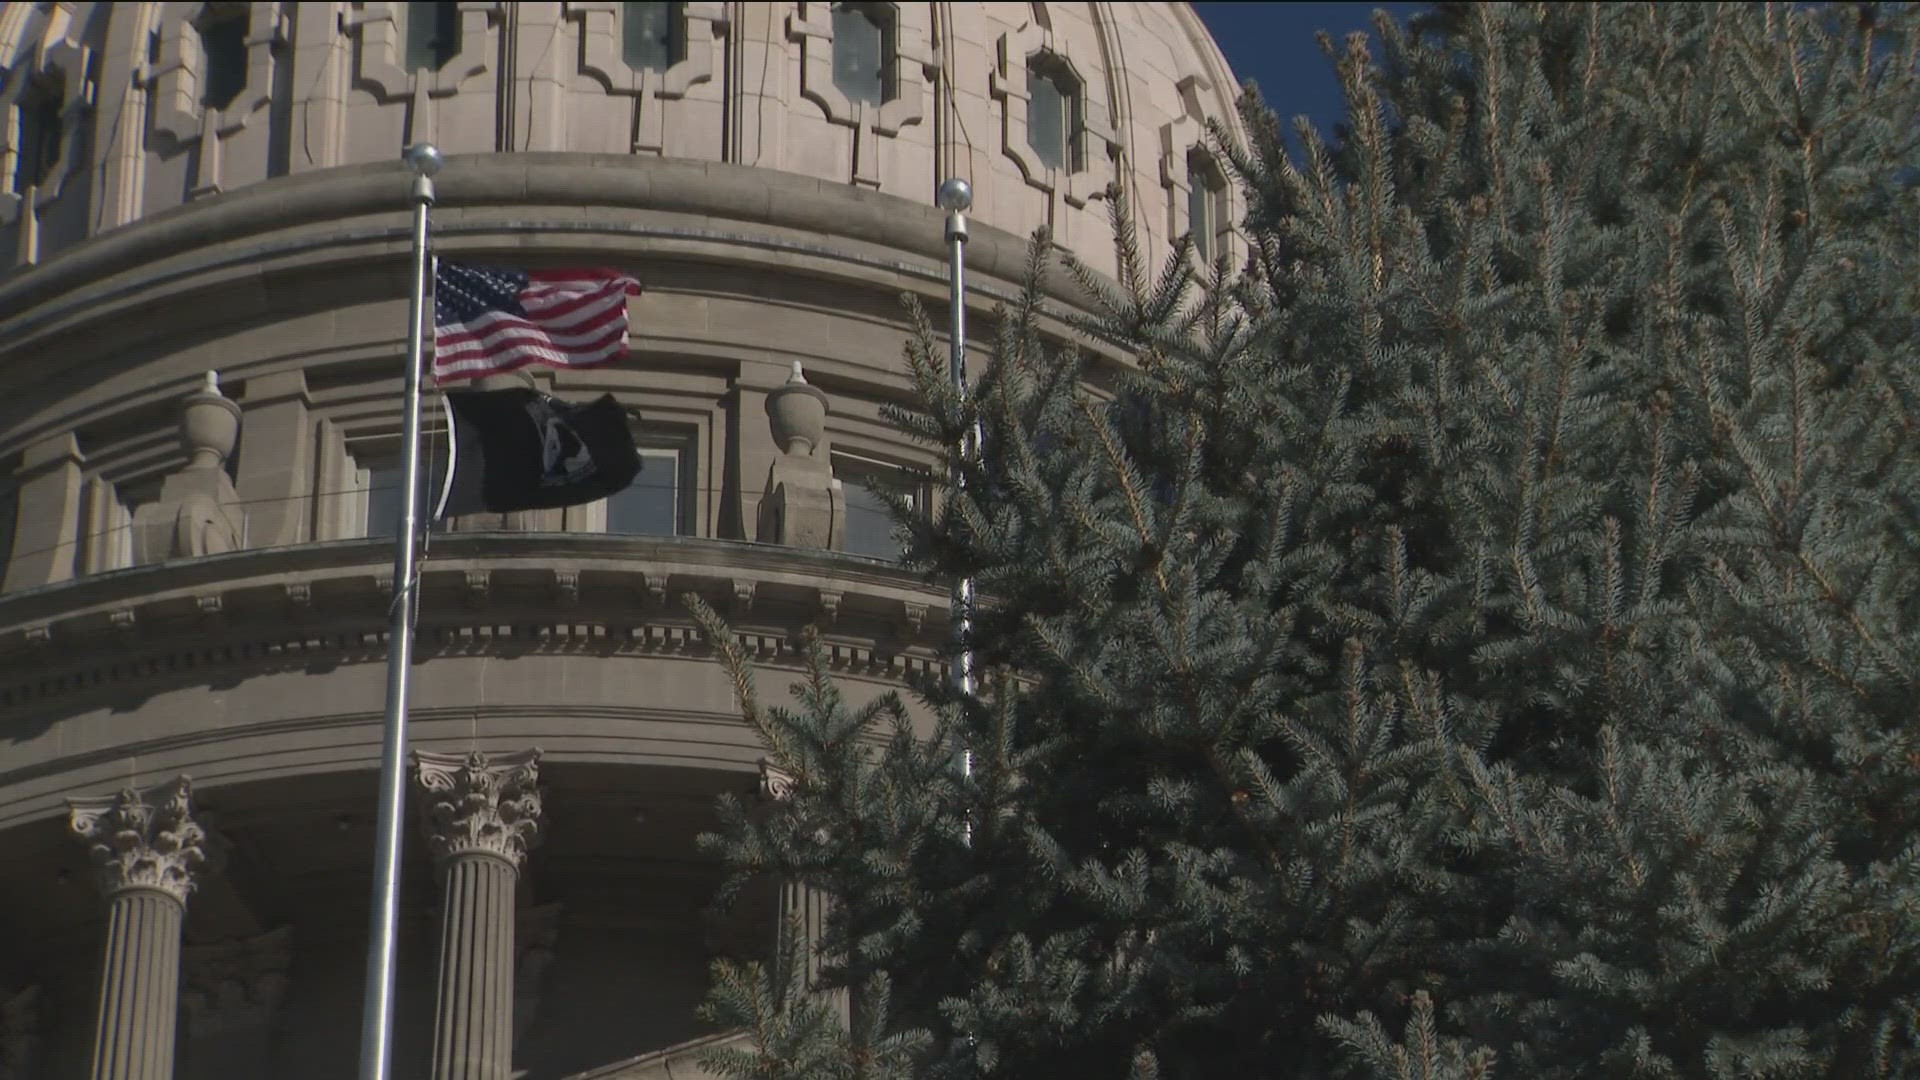 Idaho Gov. Brad Little will light the tree at roughly 6:45 p.m. Thursday. The celebration begins at 5:30 p.m. and includes a visit from Santa.